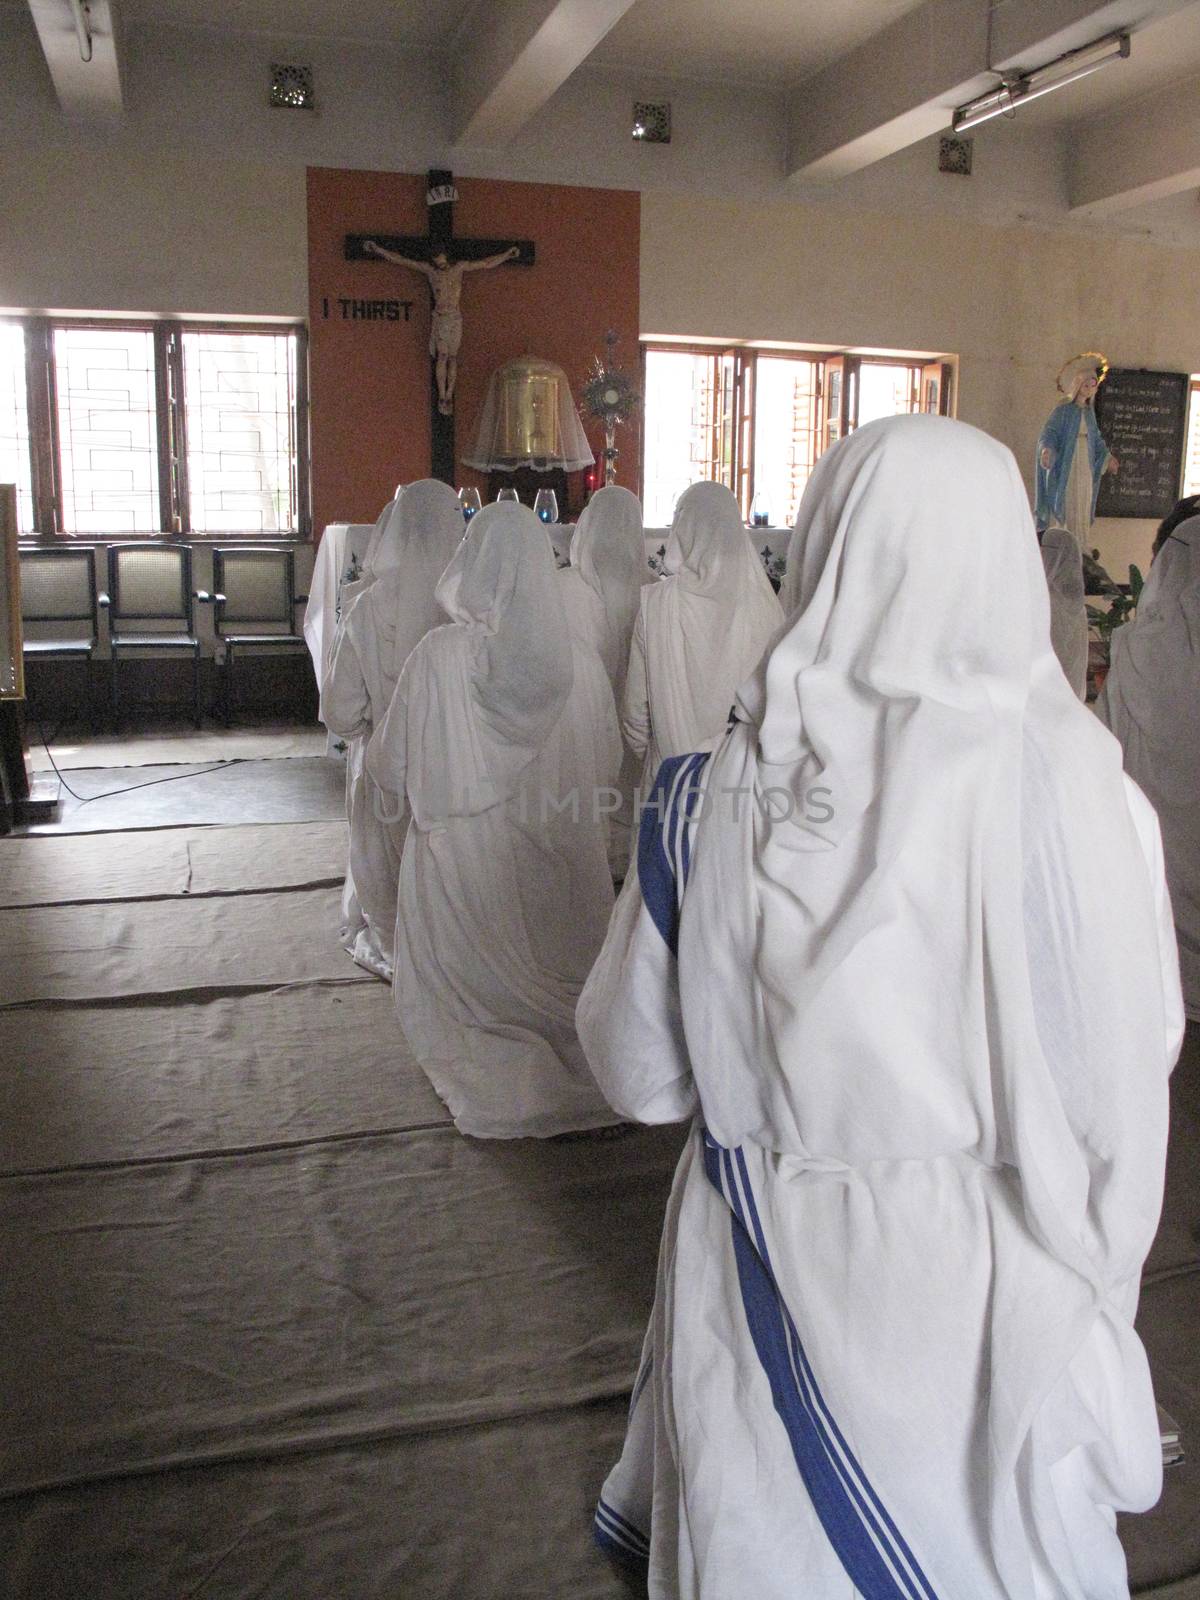 Sisters of Mother Teresa's Missionaries of Charity in prayer in the chapel of the Mother House, Kolkata by atlas